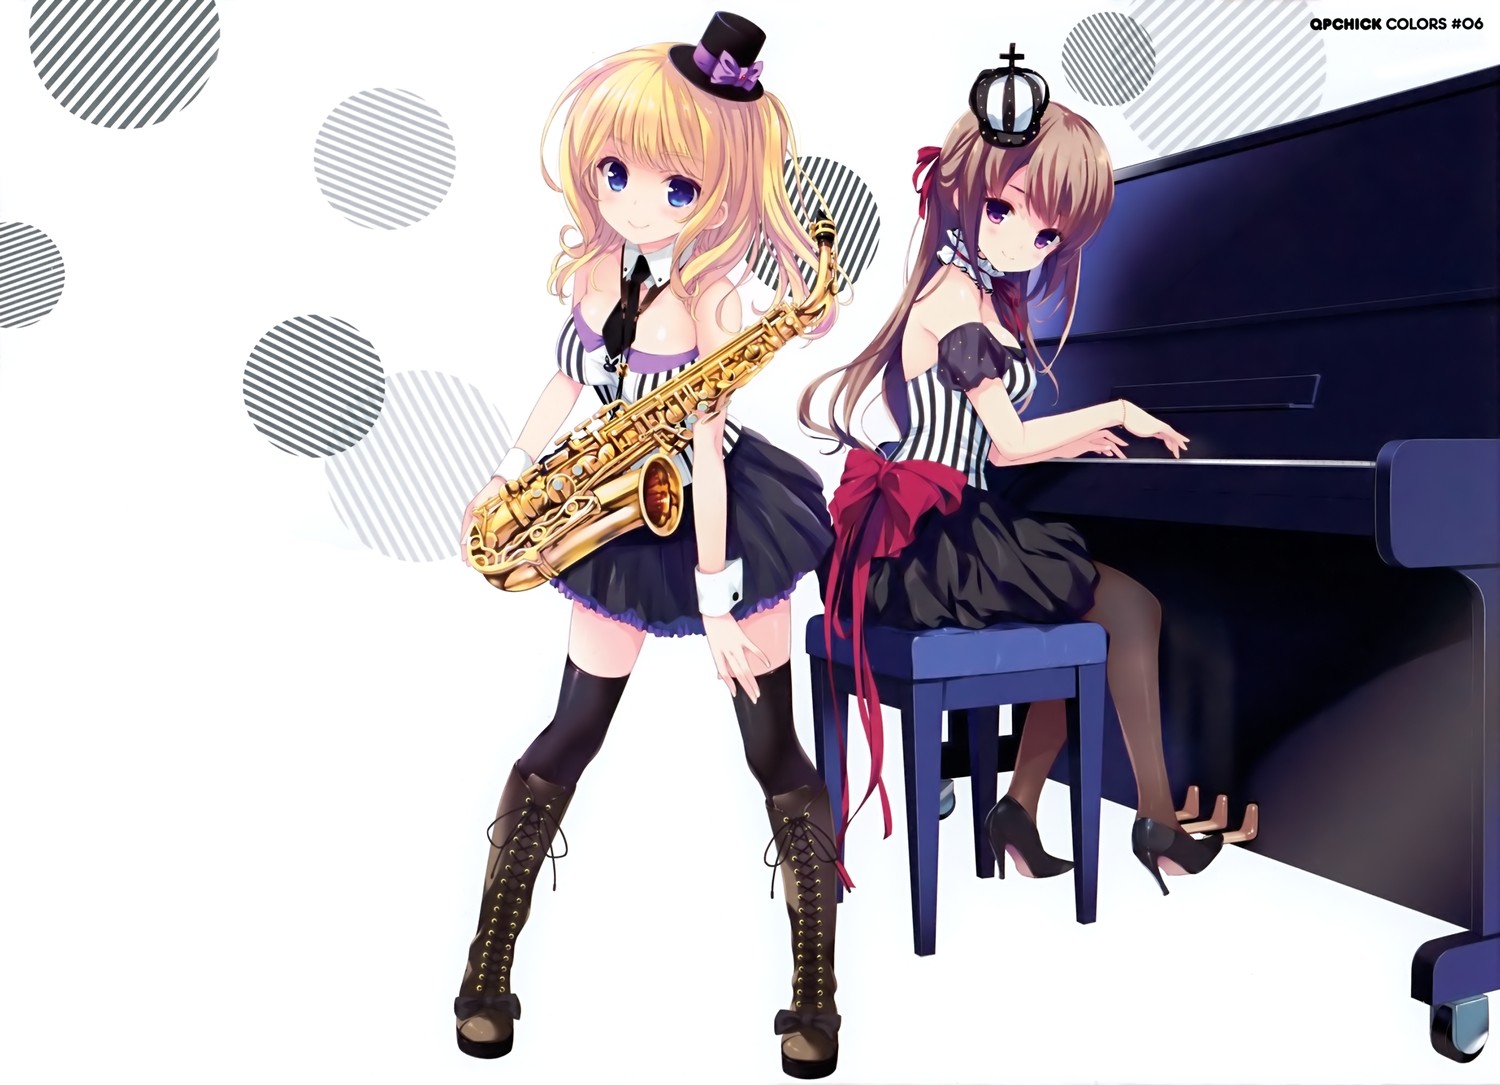 Anime 1500x1085 original characters thigh-highs musical instrument saxaphone piano anime girls anime funny hats women with hats white background two women